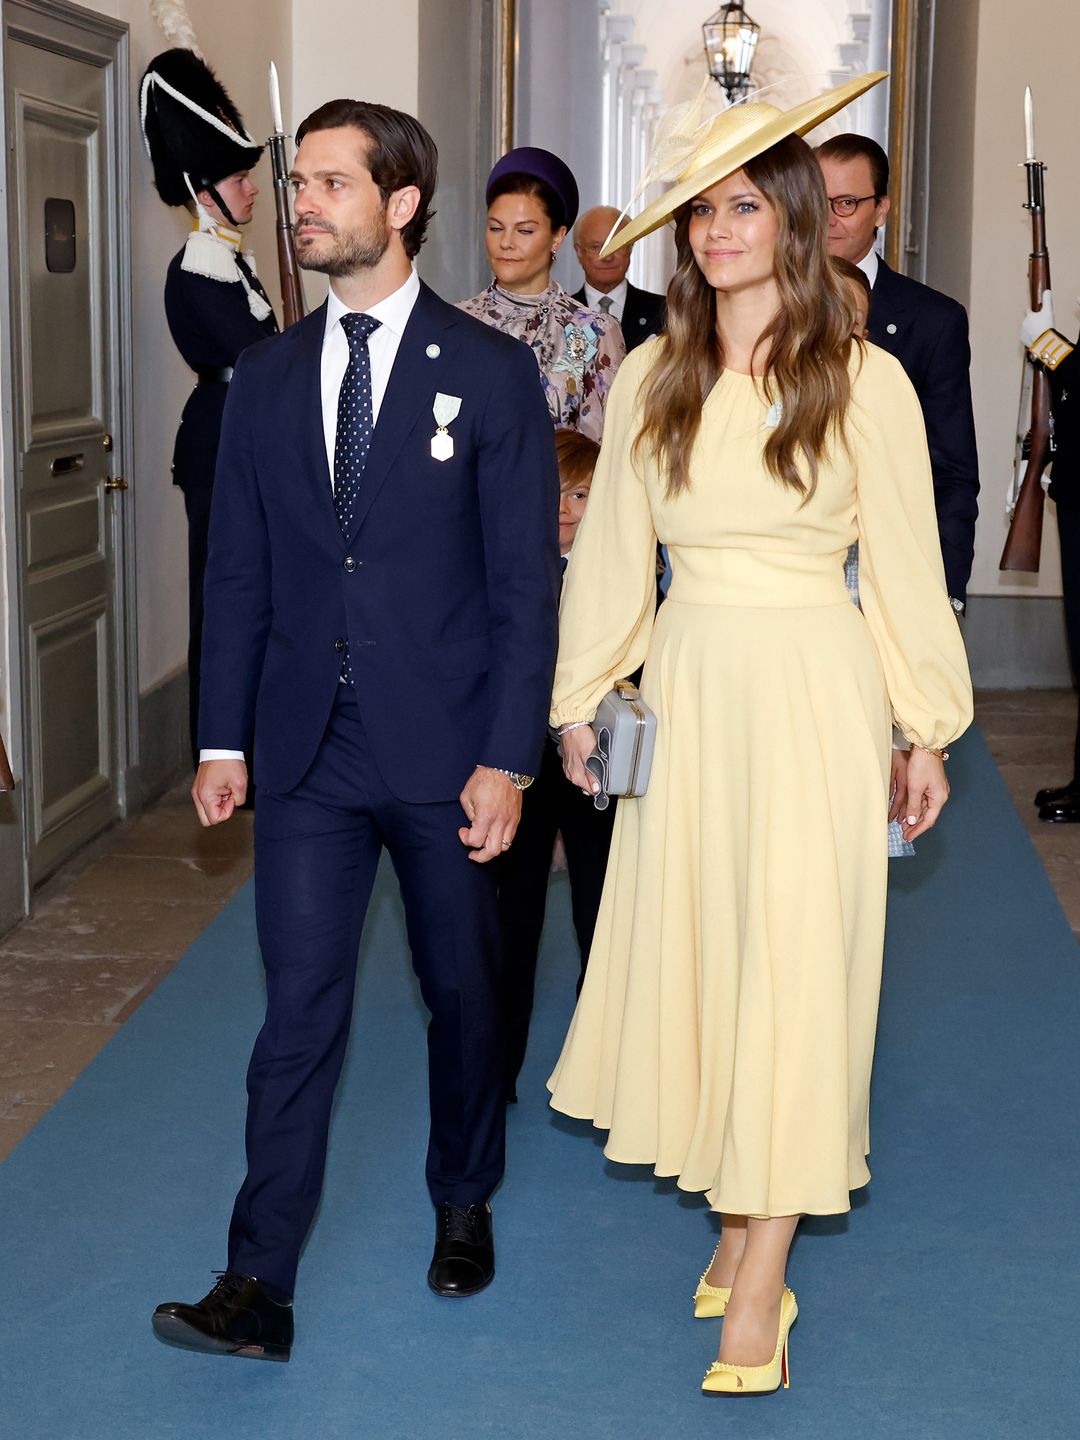 Prince Carl Phillip of Sweden and Princess Sofia of Sweden arrive for the Te Deum during the celebration of the 50th coronation anniversary of King Carl Gustav of Sweden. Sofia wears an all-yellow dress